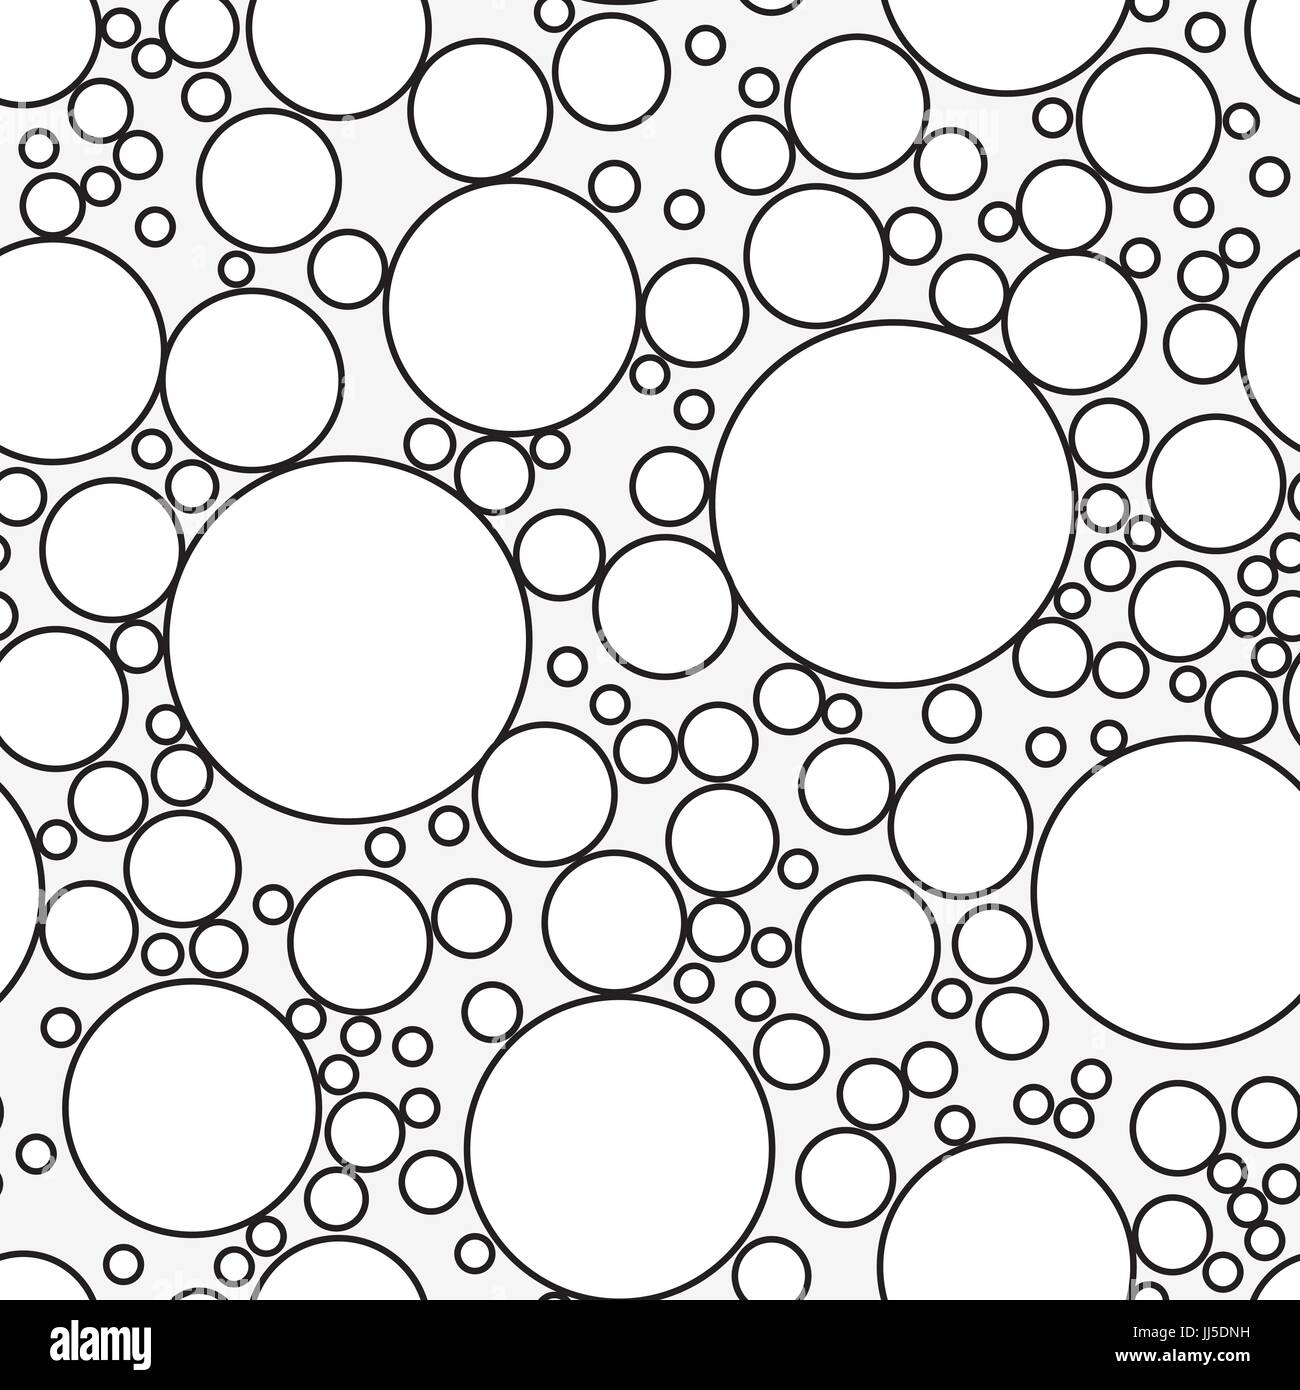 Seamless pattern with soap bubbles isolated on white background. Stock Vector